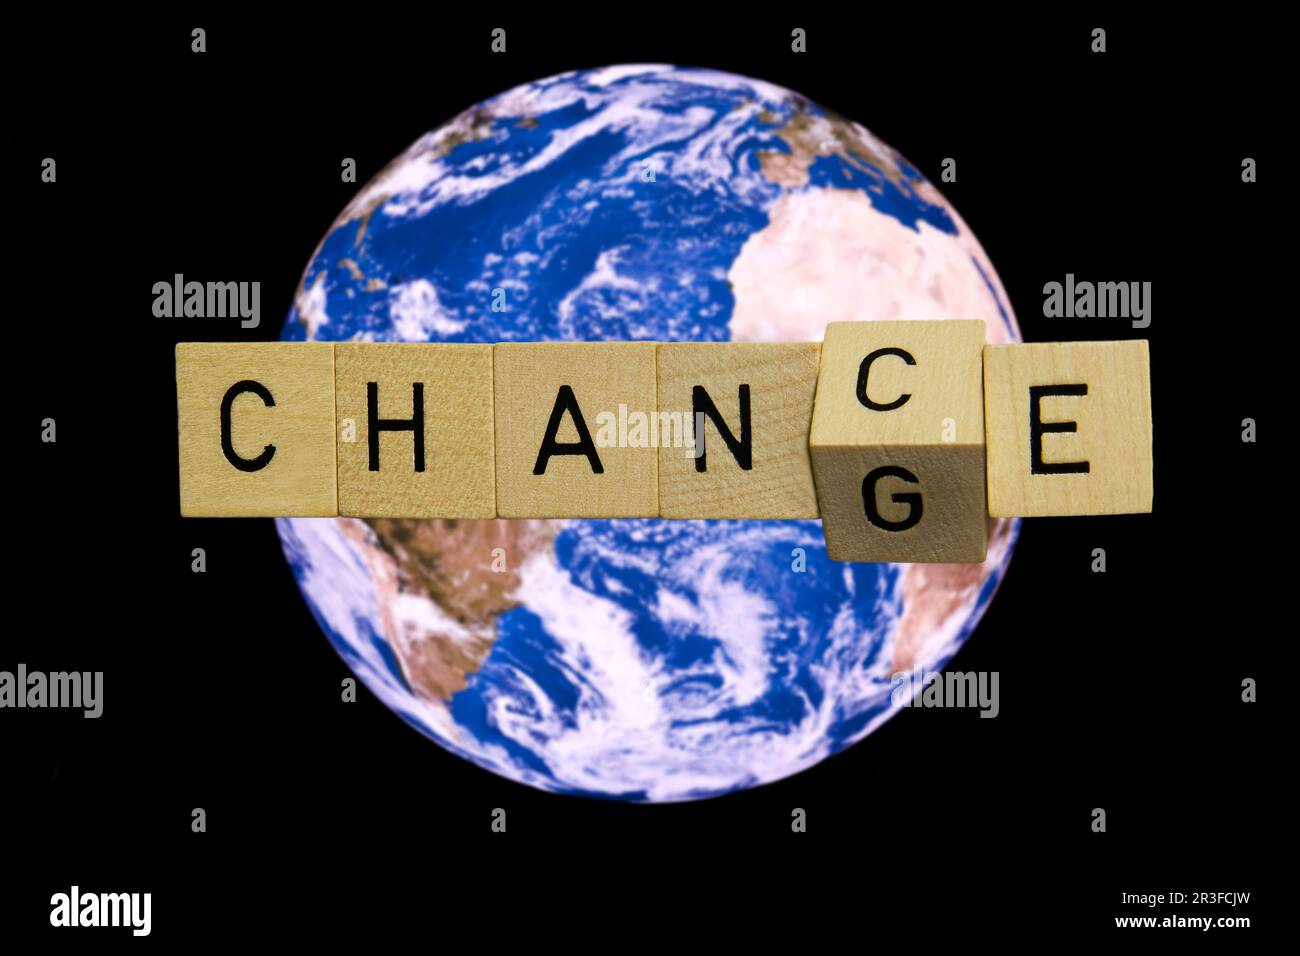 Chance or change, symbolic image for the chance or the change on earth Stock Photo